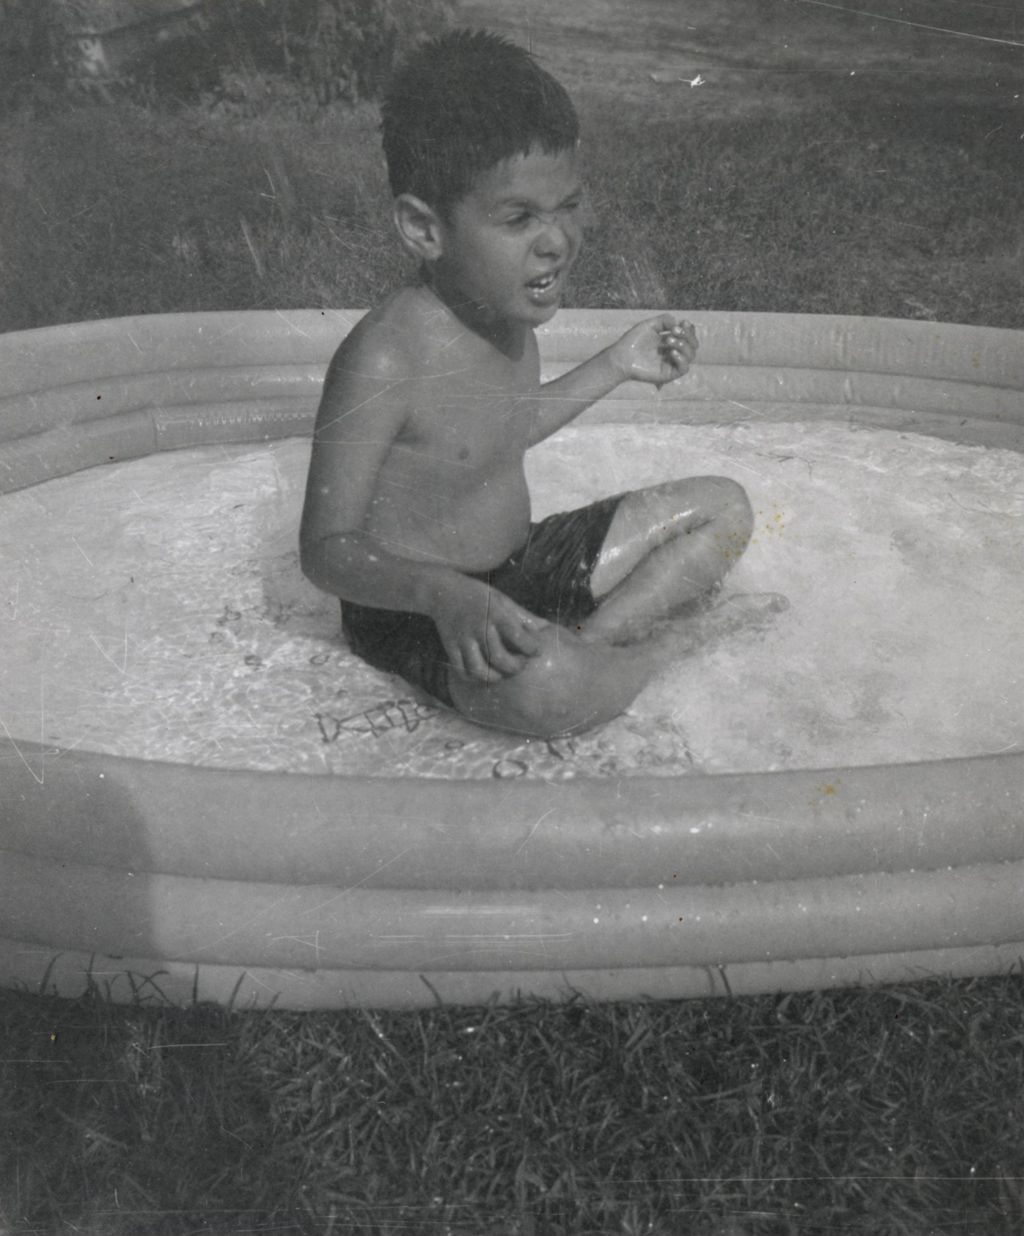 Miniature of Boy in wading pool